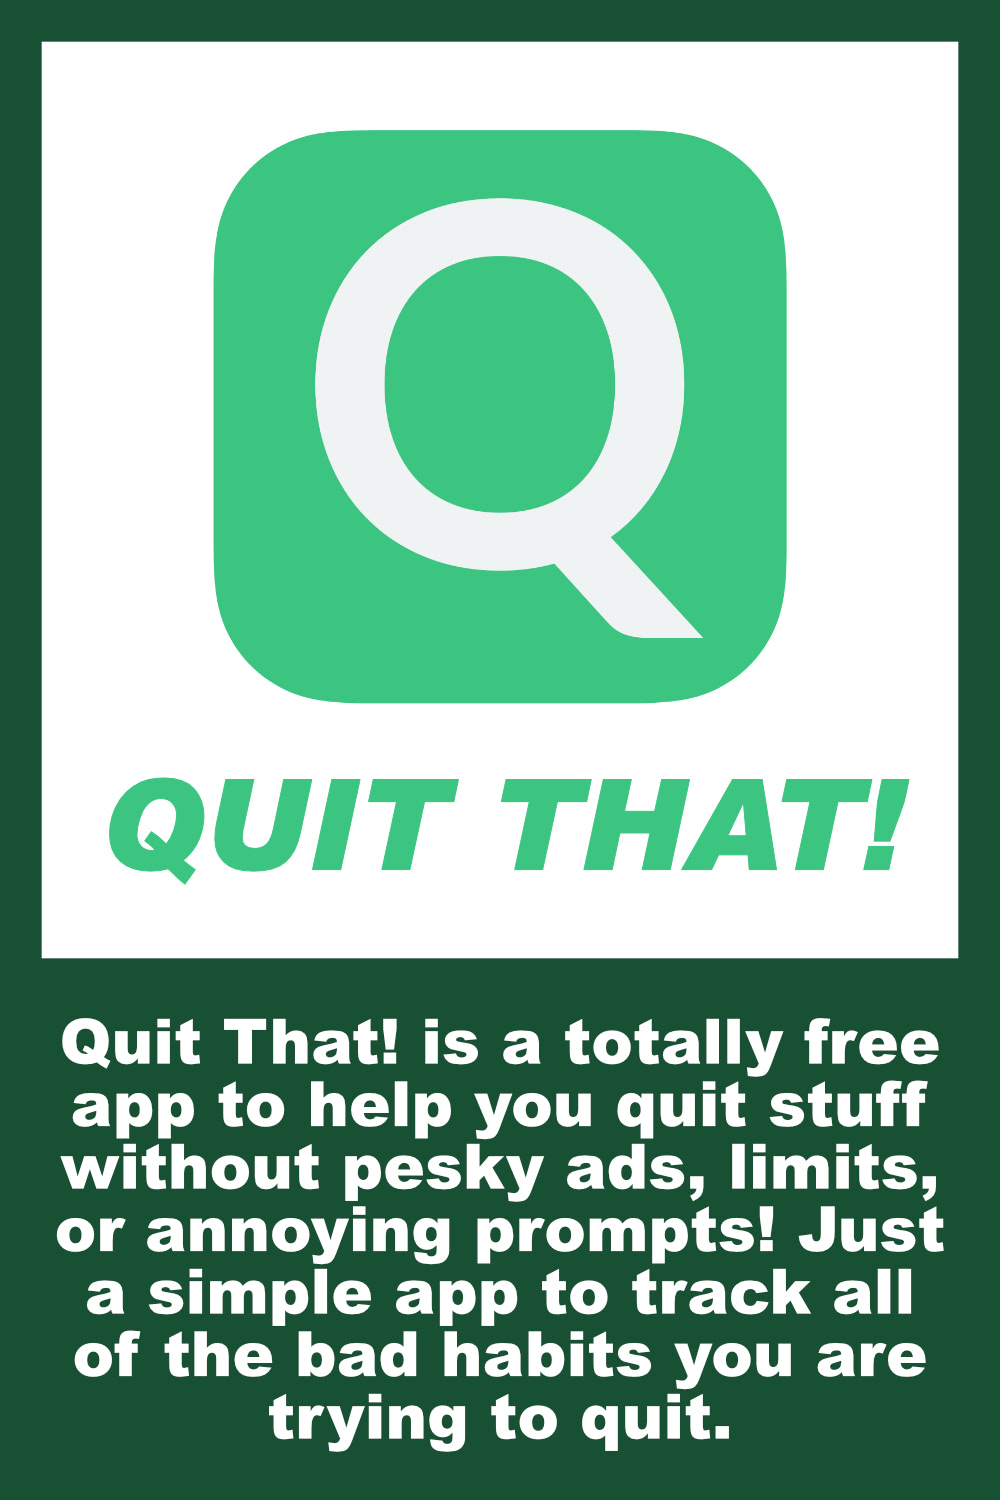 Quit That! is a totally free app to help you quit stuff without pesky ads, limits, or annoying prompts! Just a simple app to track all of the bad habits you are trying to quit.